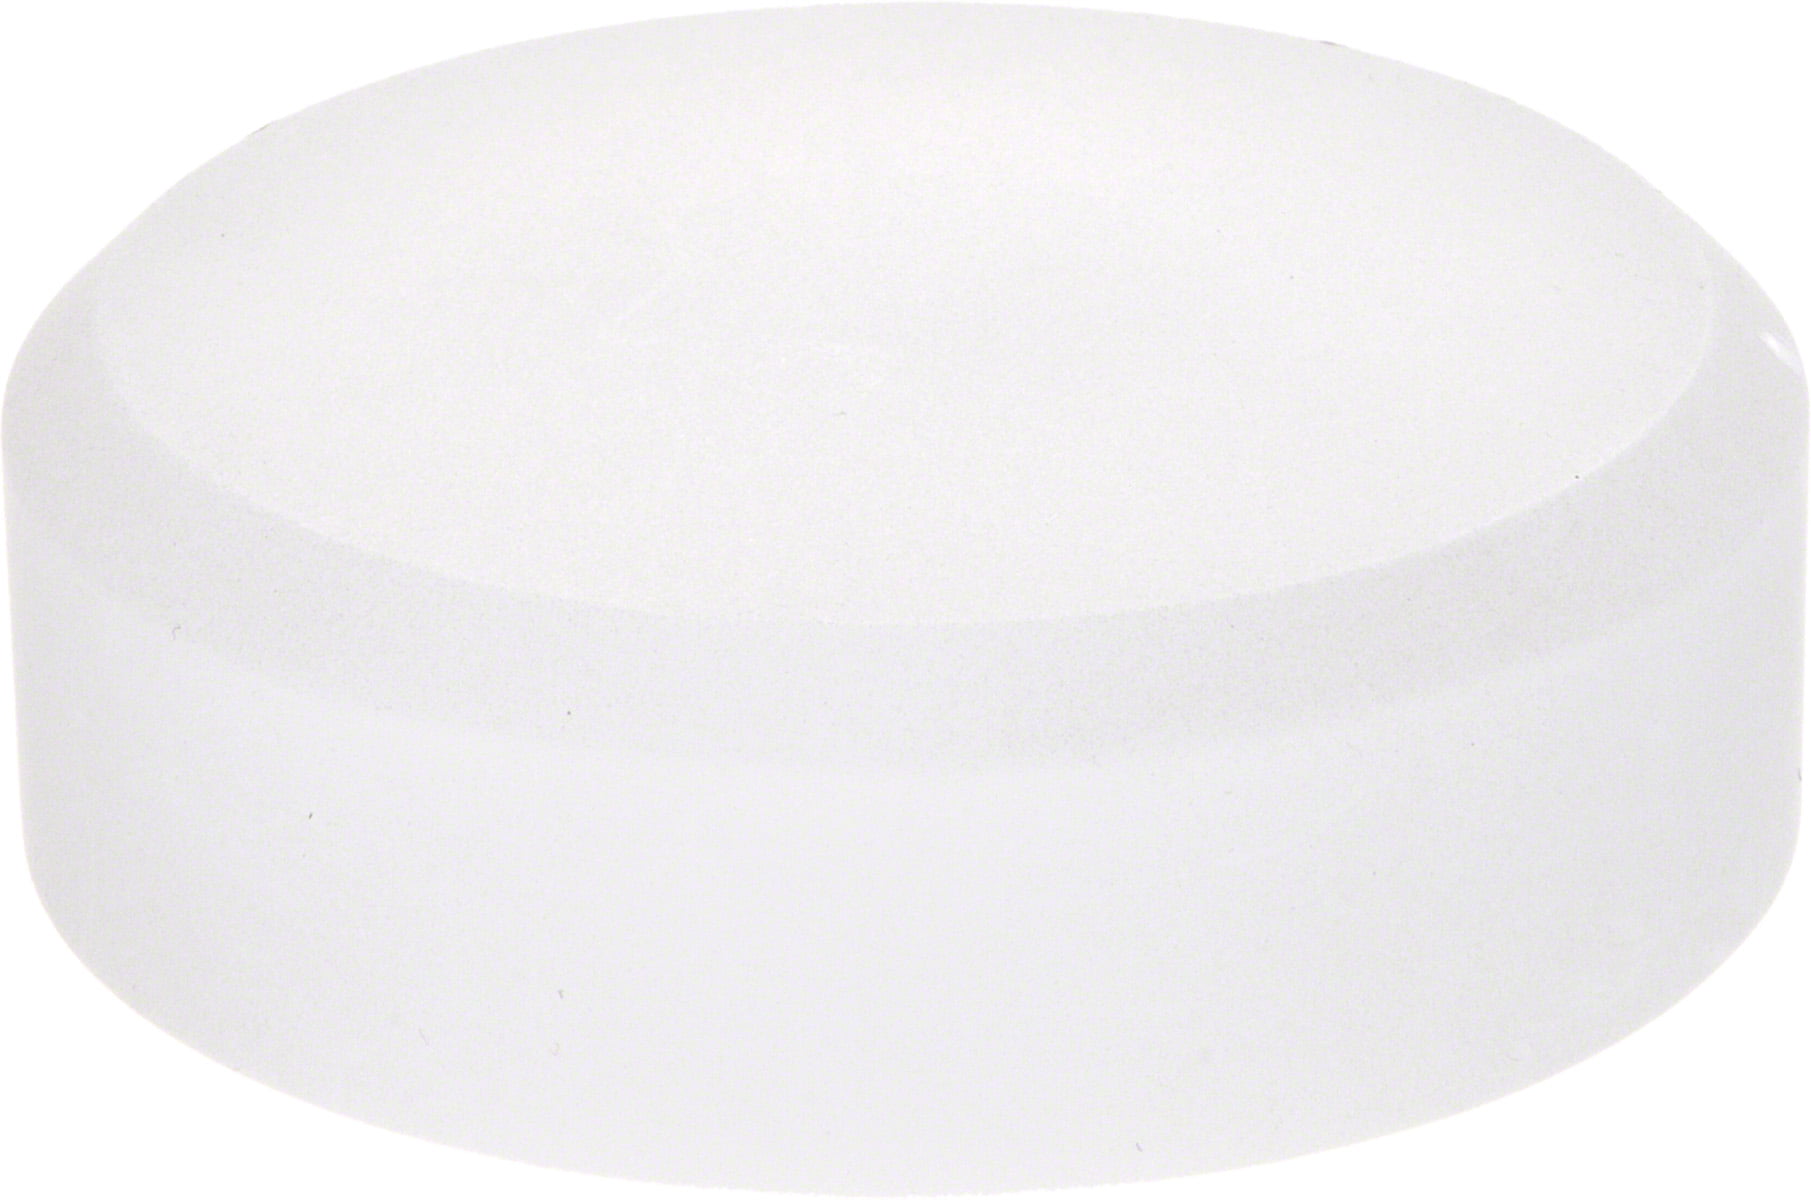 Plymor Clear Acrylic Beveled Round Display Base, 7